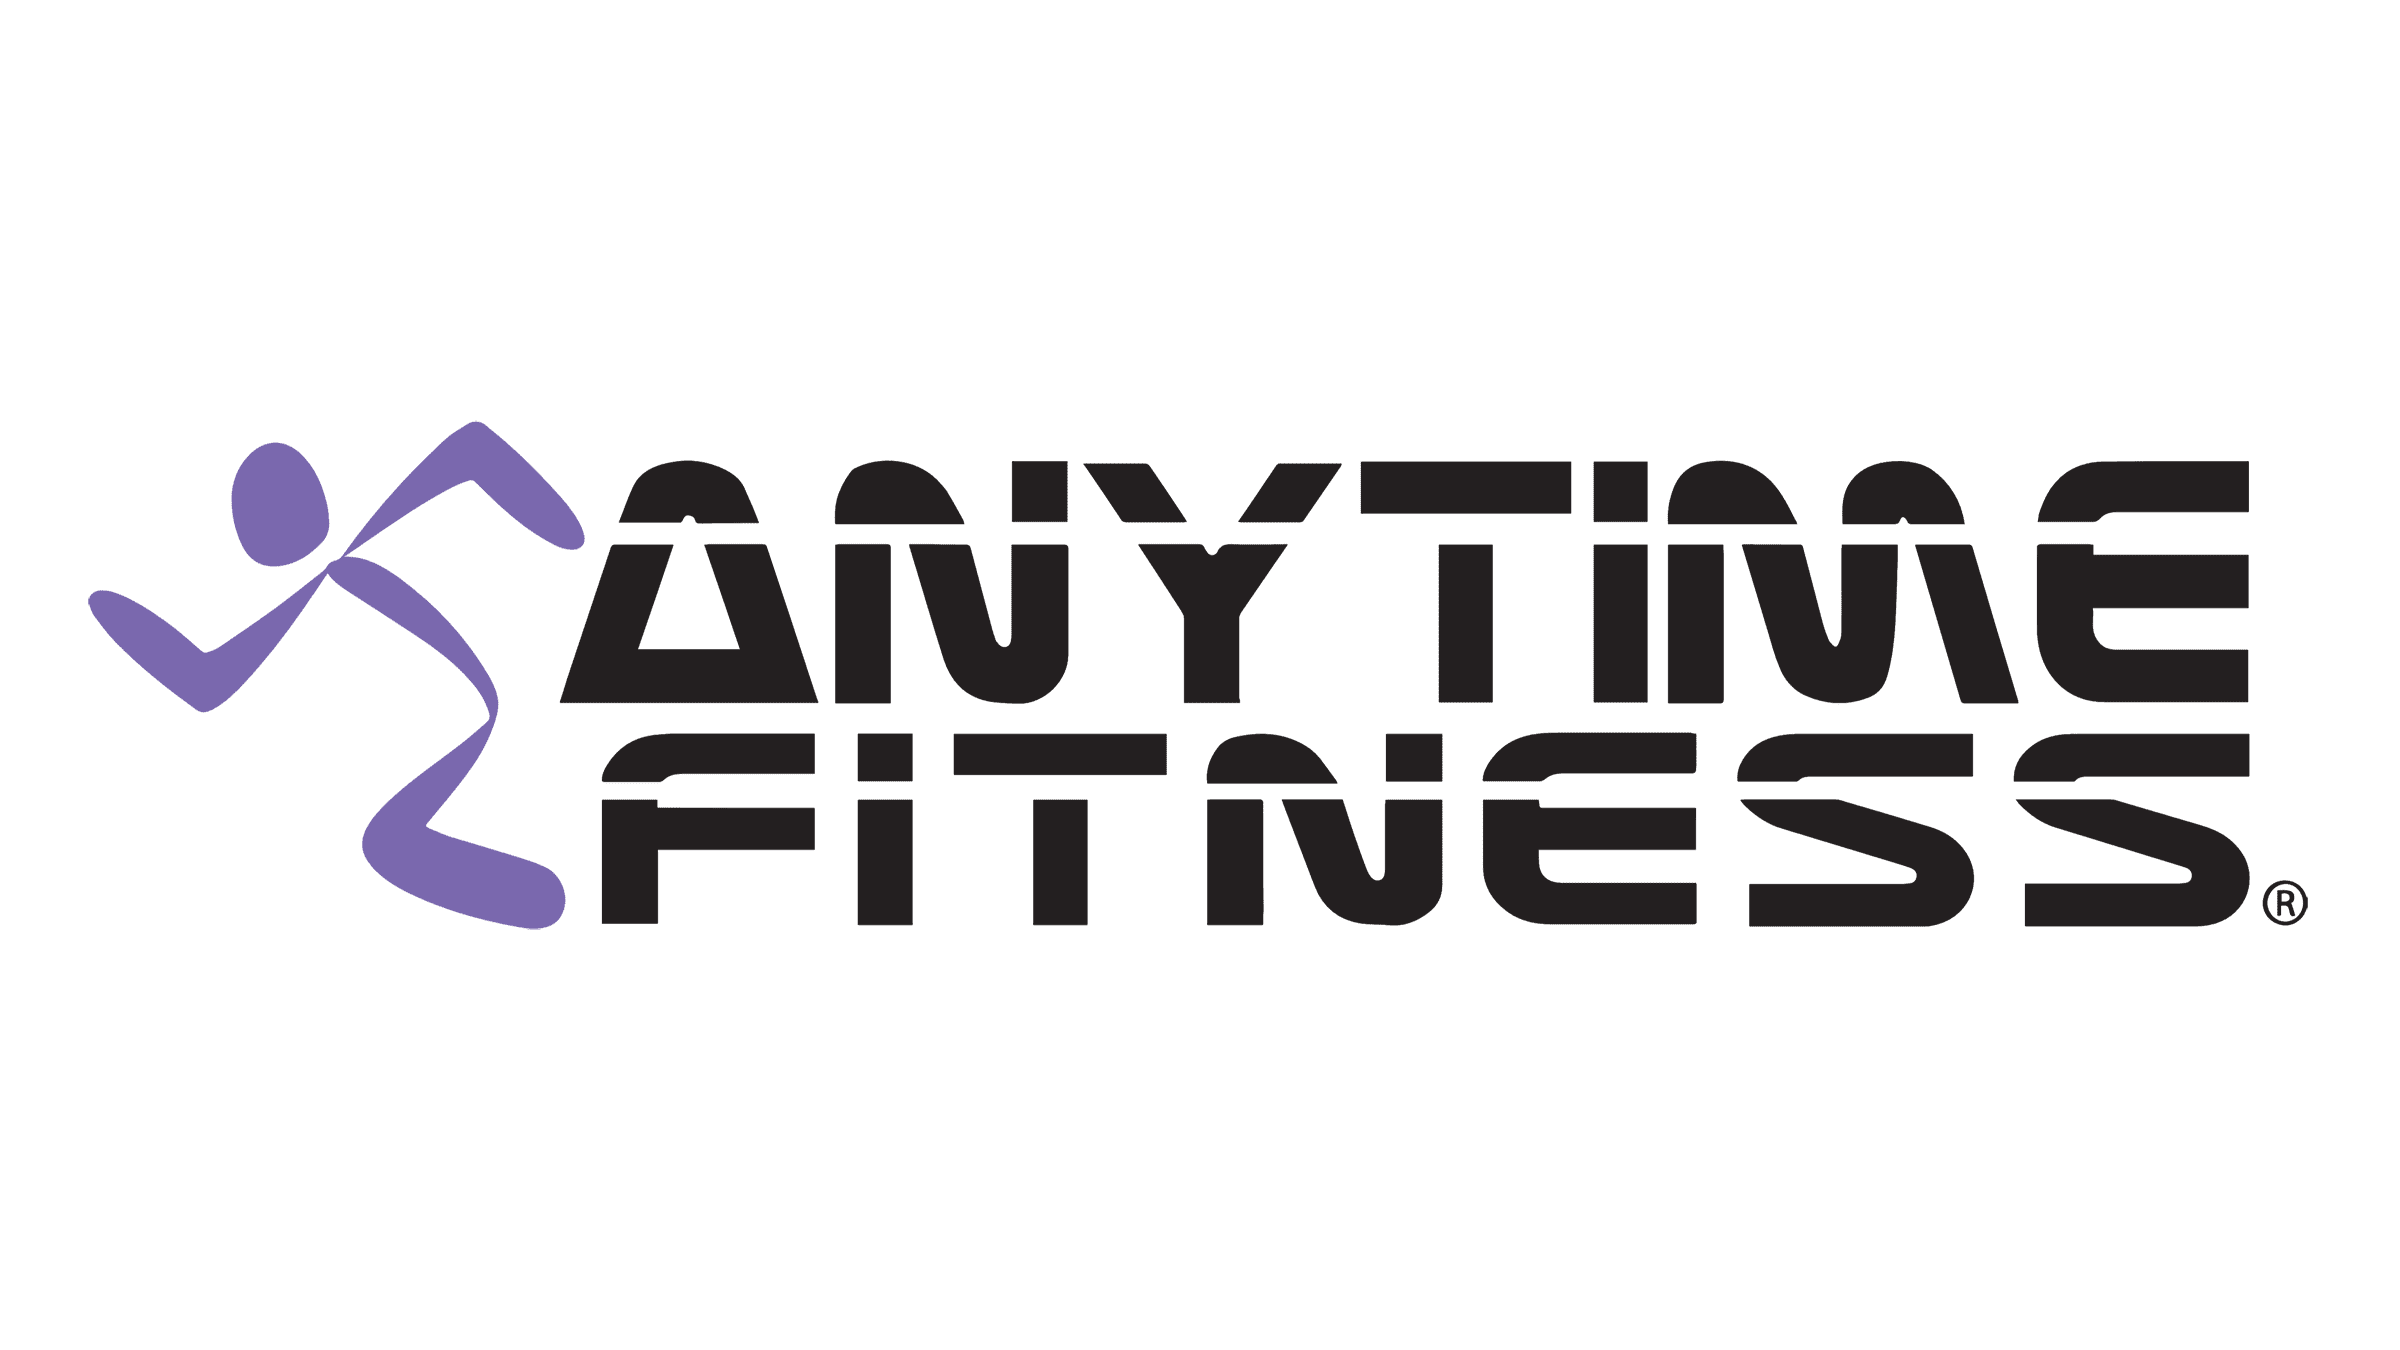 {"Text":"","URL":"https://www.rhtc.com.au/stores-services/anytime-fitness","OpenNewWindow":false}